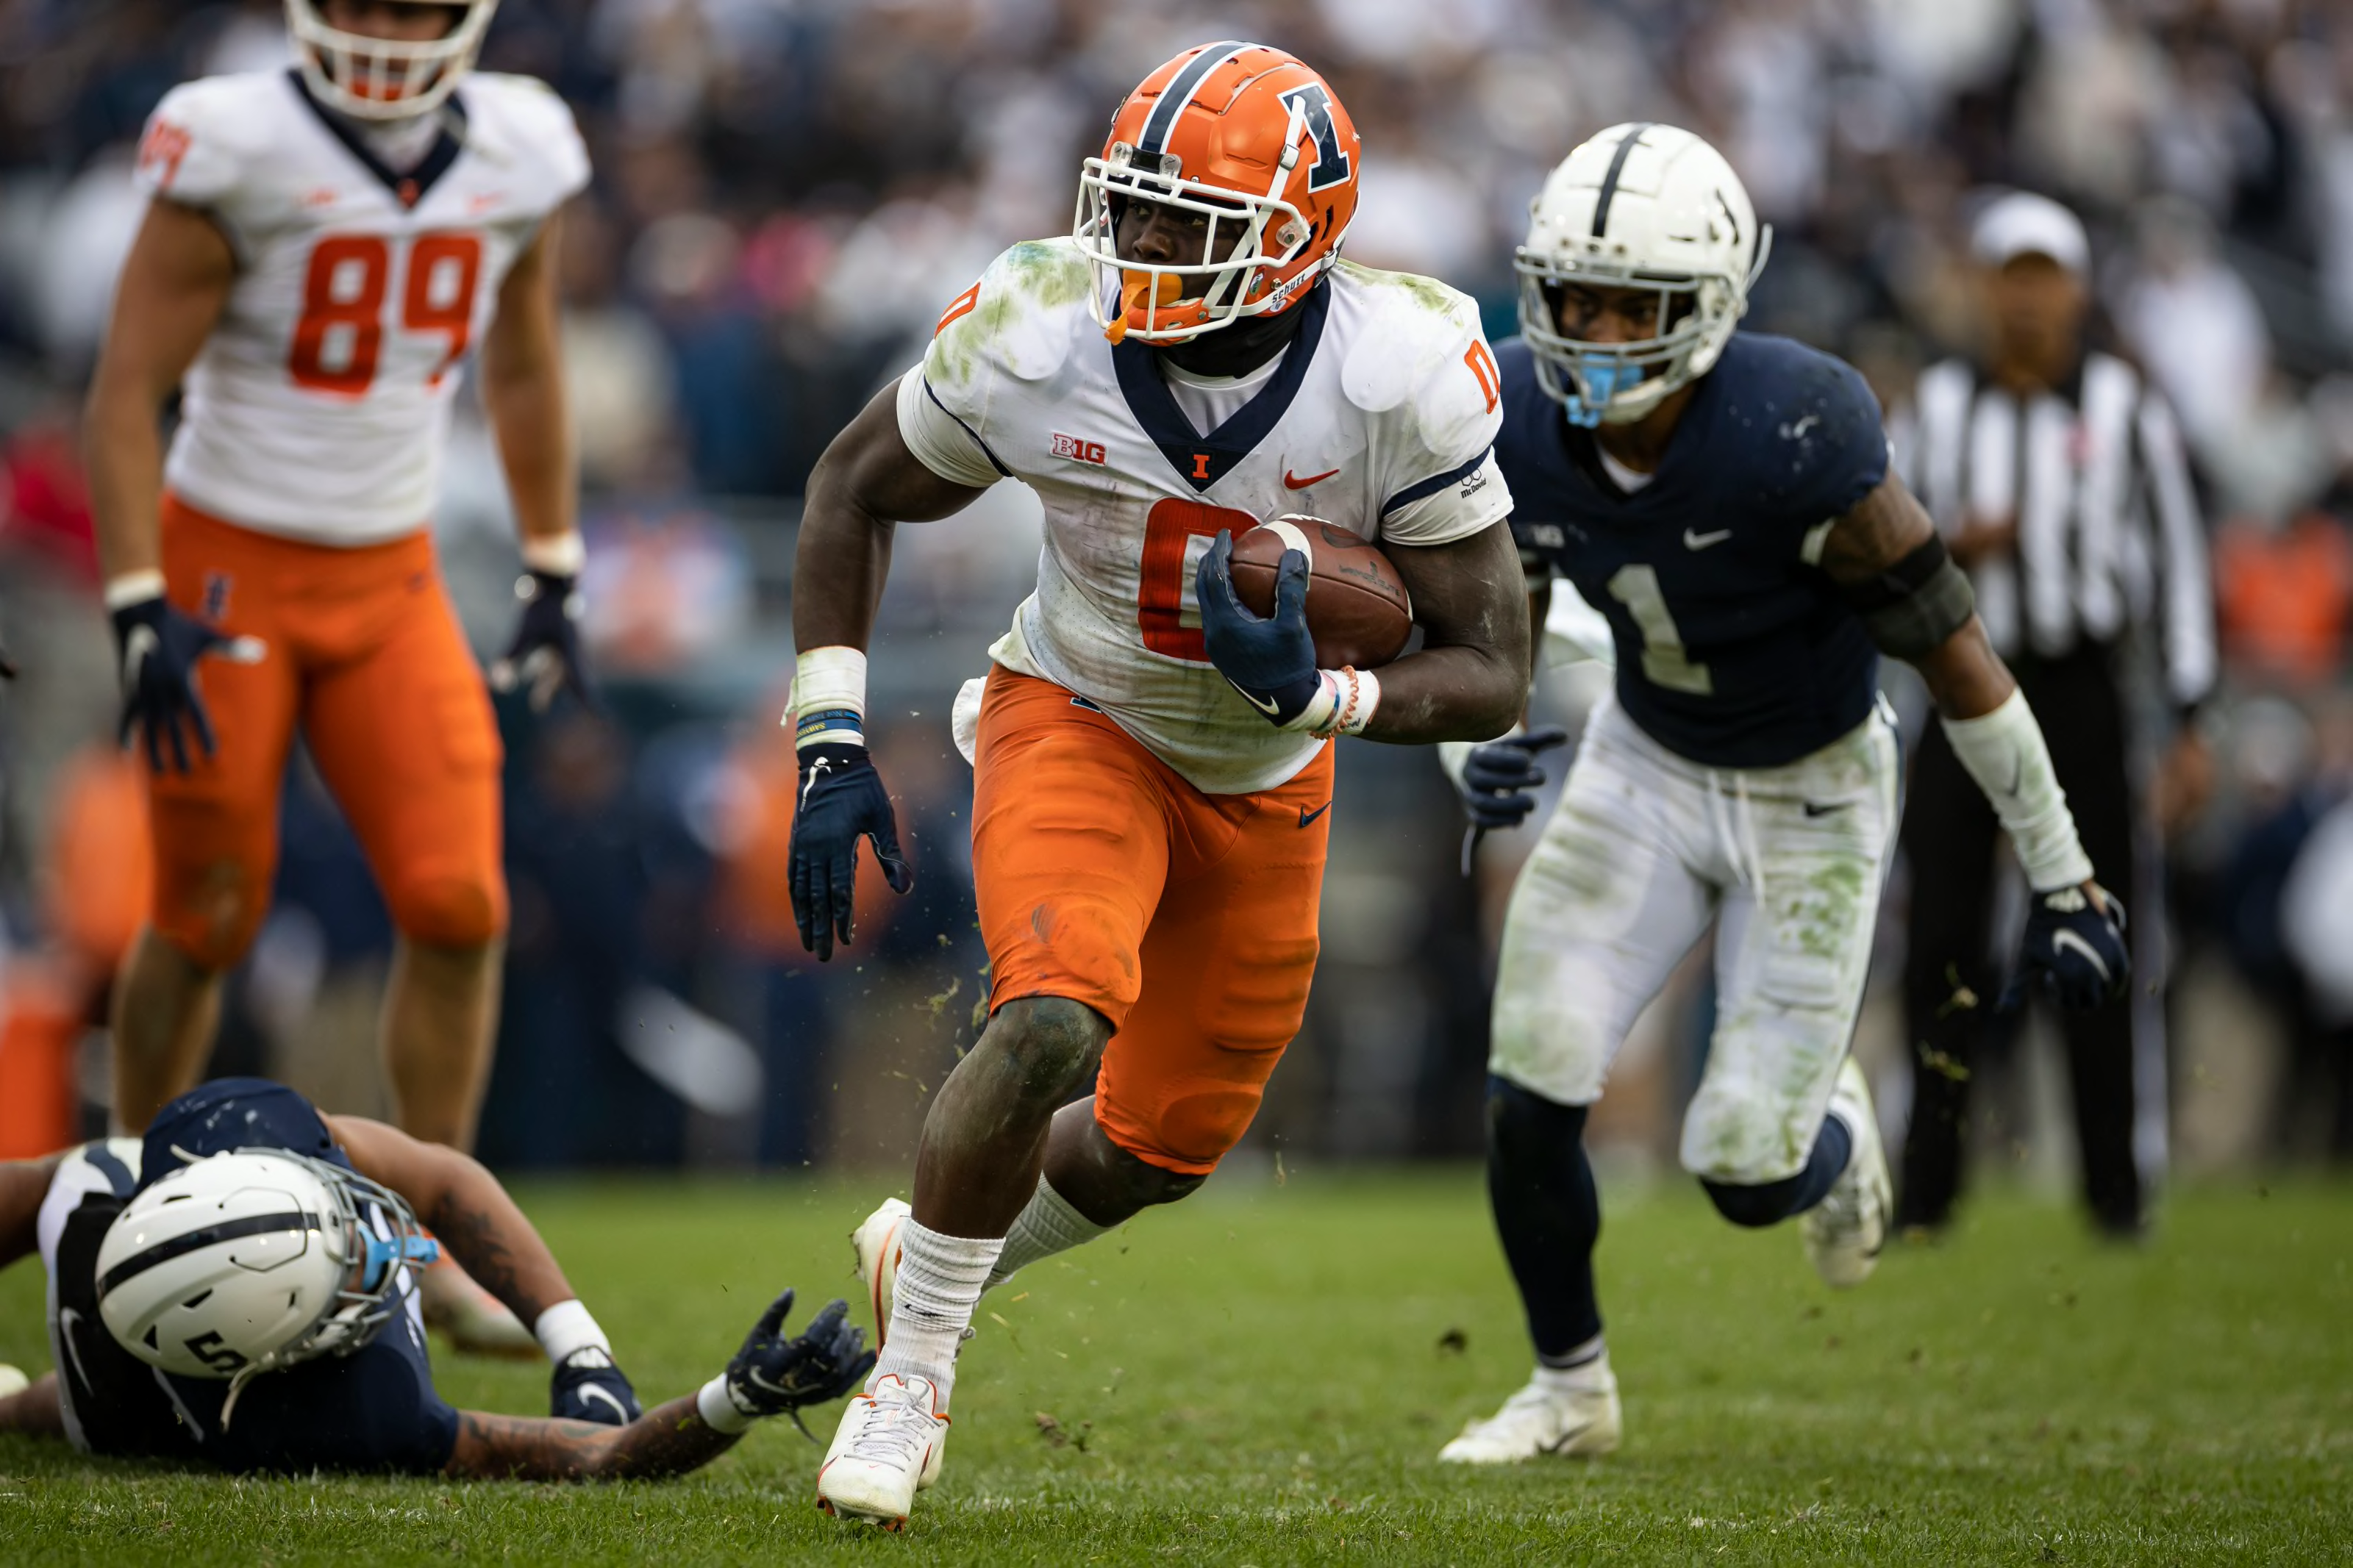 Illinois Football 4 observations from the Illini win over Penn State